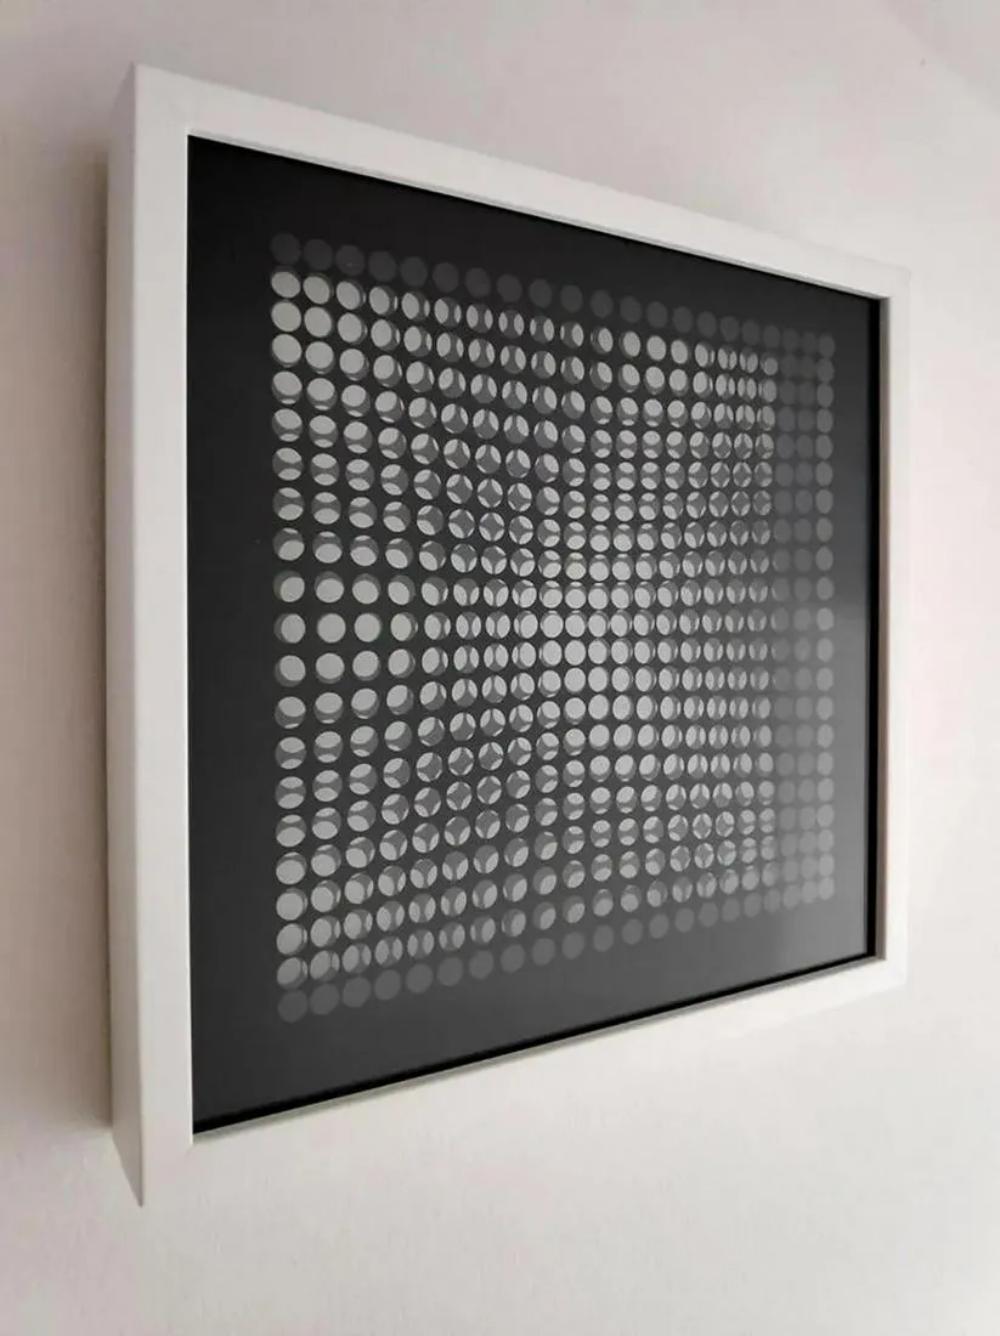 Interior Print Victor Vasarely - VICTOR VASARELY - OEUVRES PROFONDES CINETIQUES VII